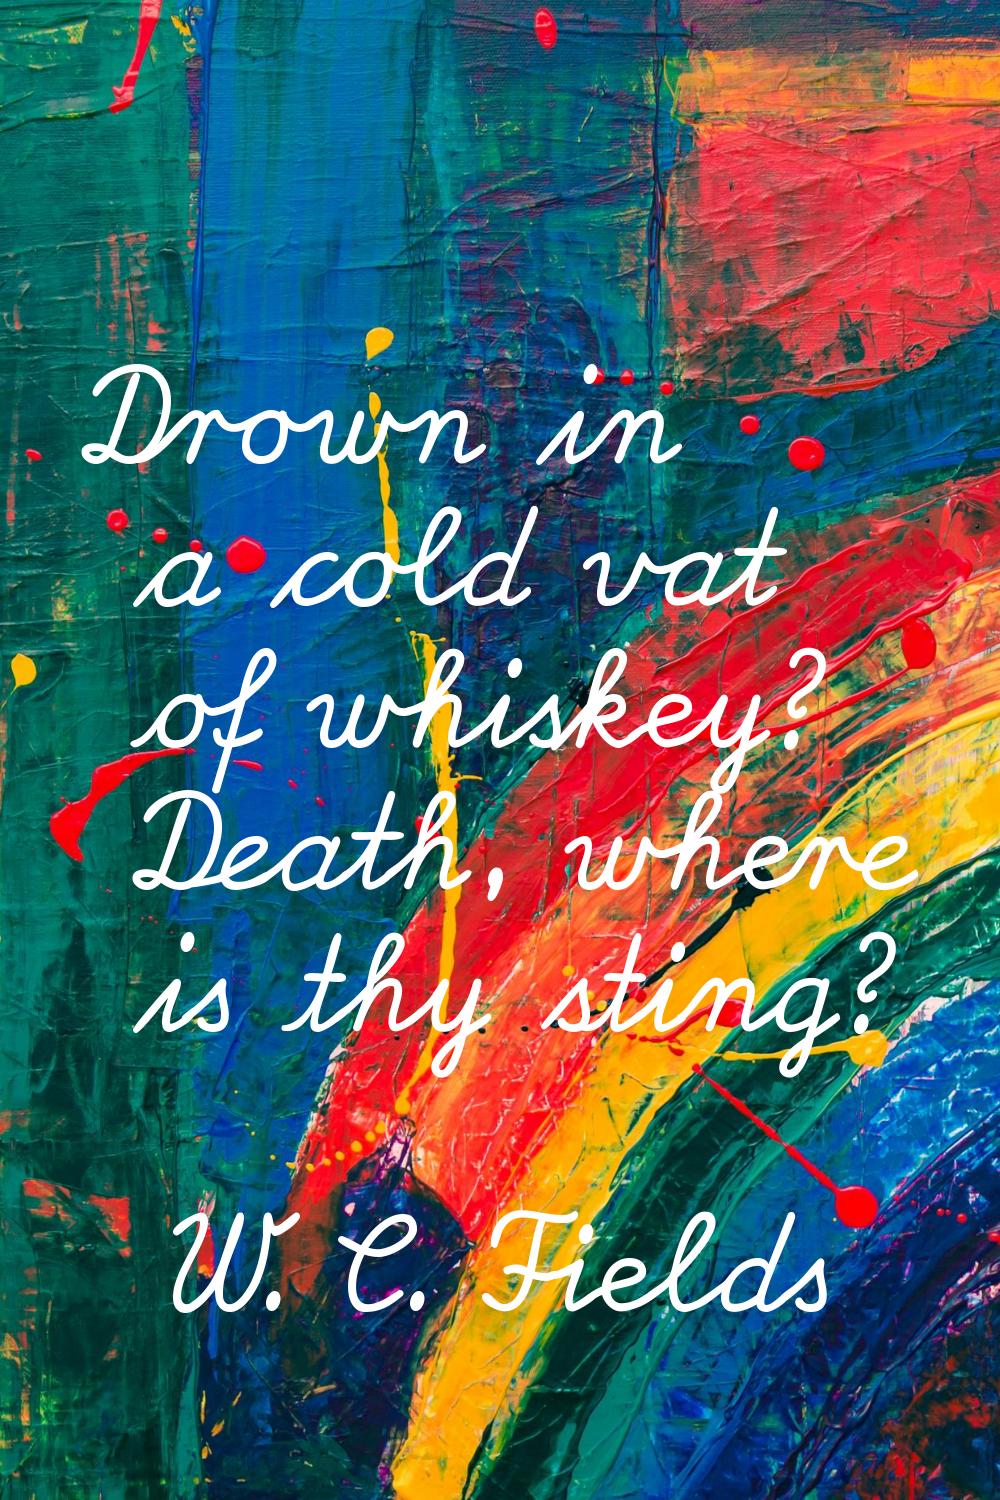 Drown in a cold vat of whiskey? Death, where is thy sting?